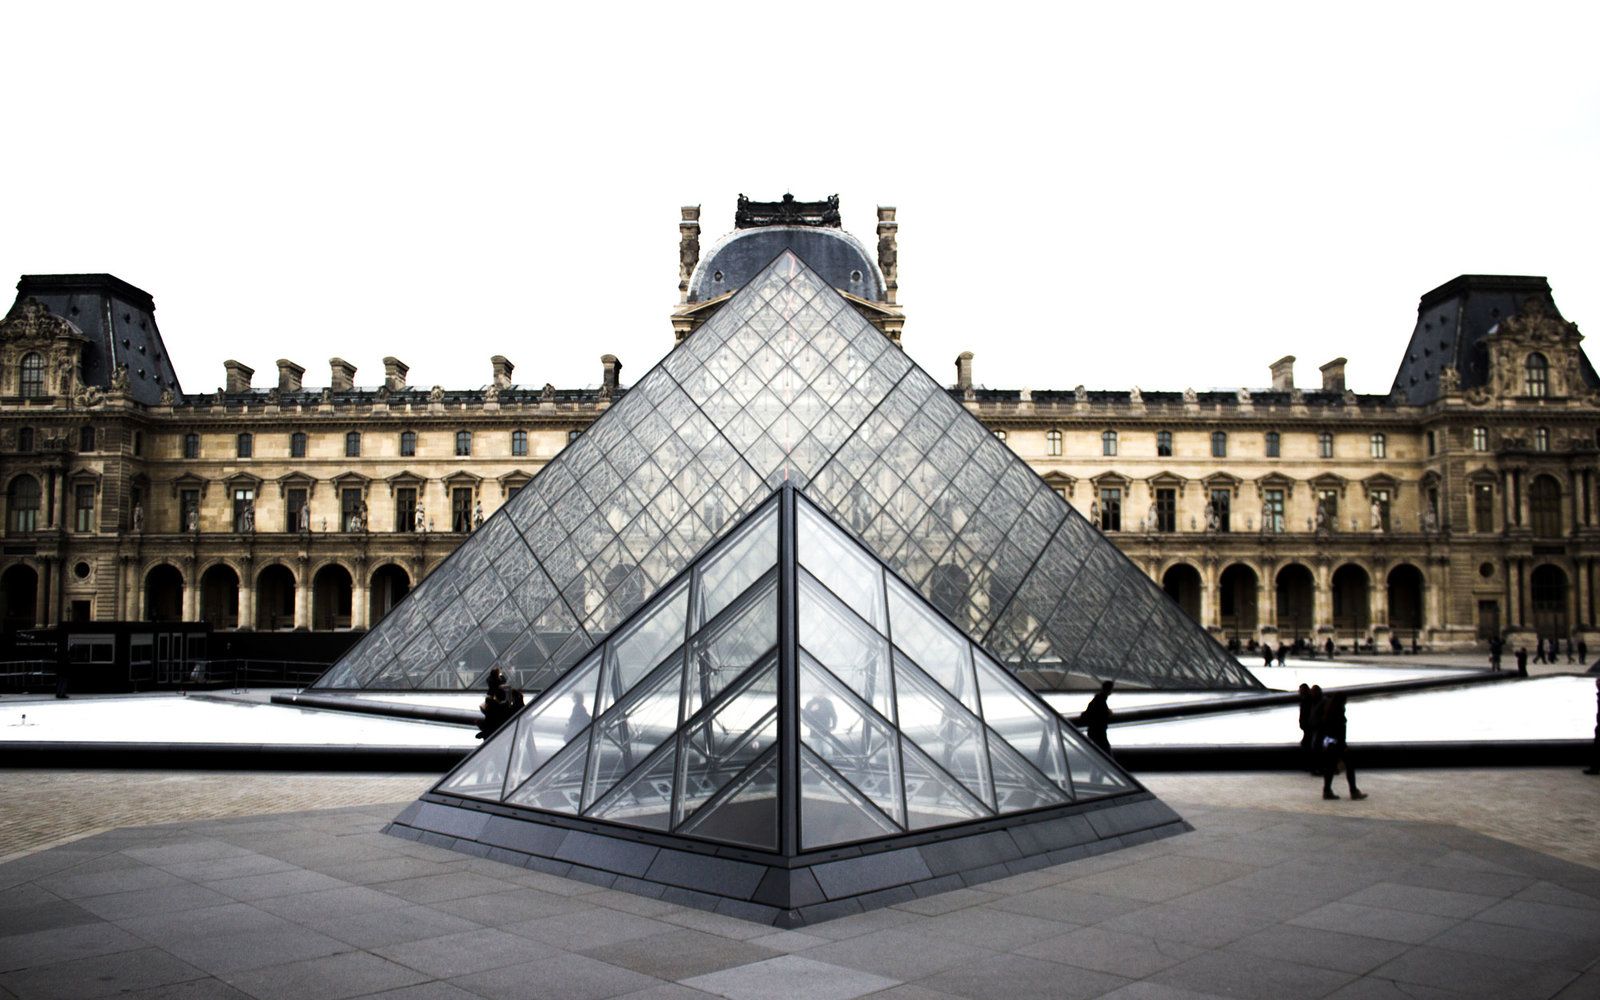 The Louvre wallpaper, Man Made, HQ The Louvre pictureK Wallpaper 2019